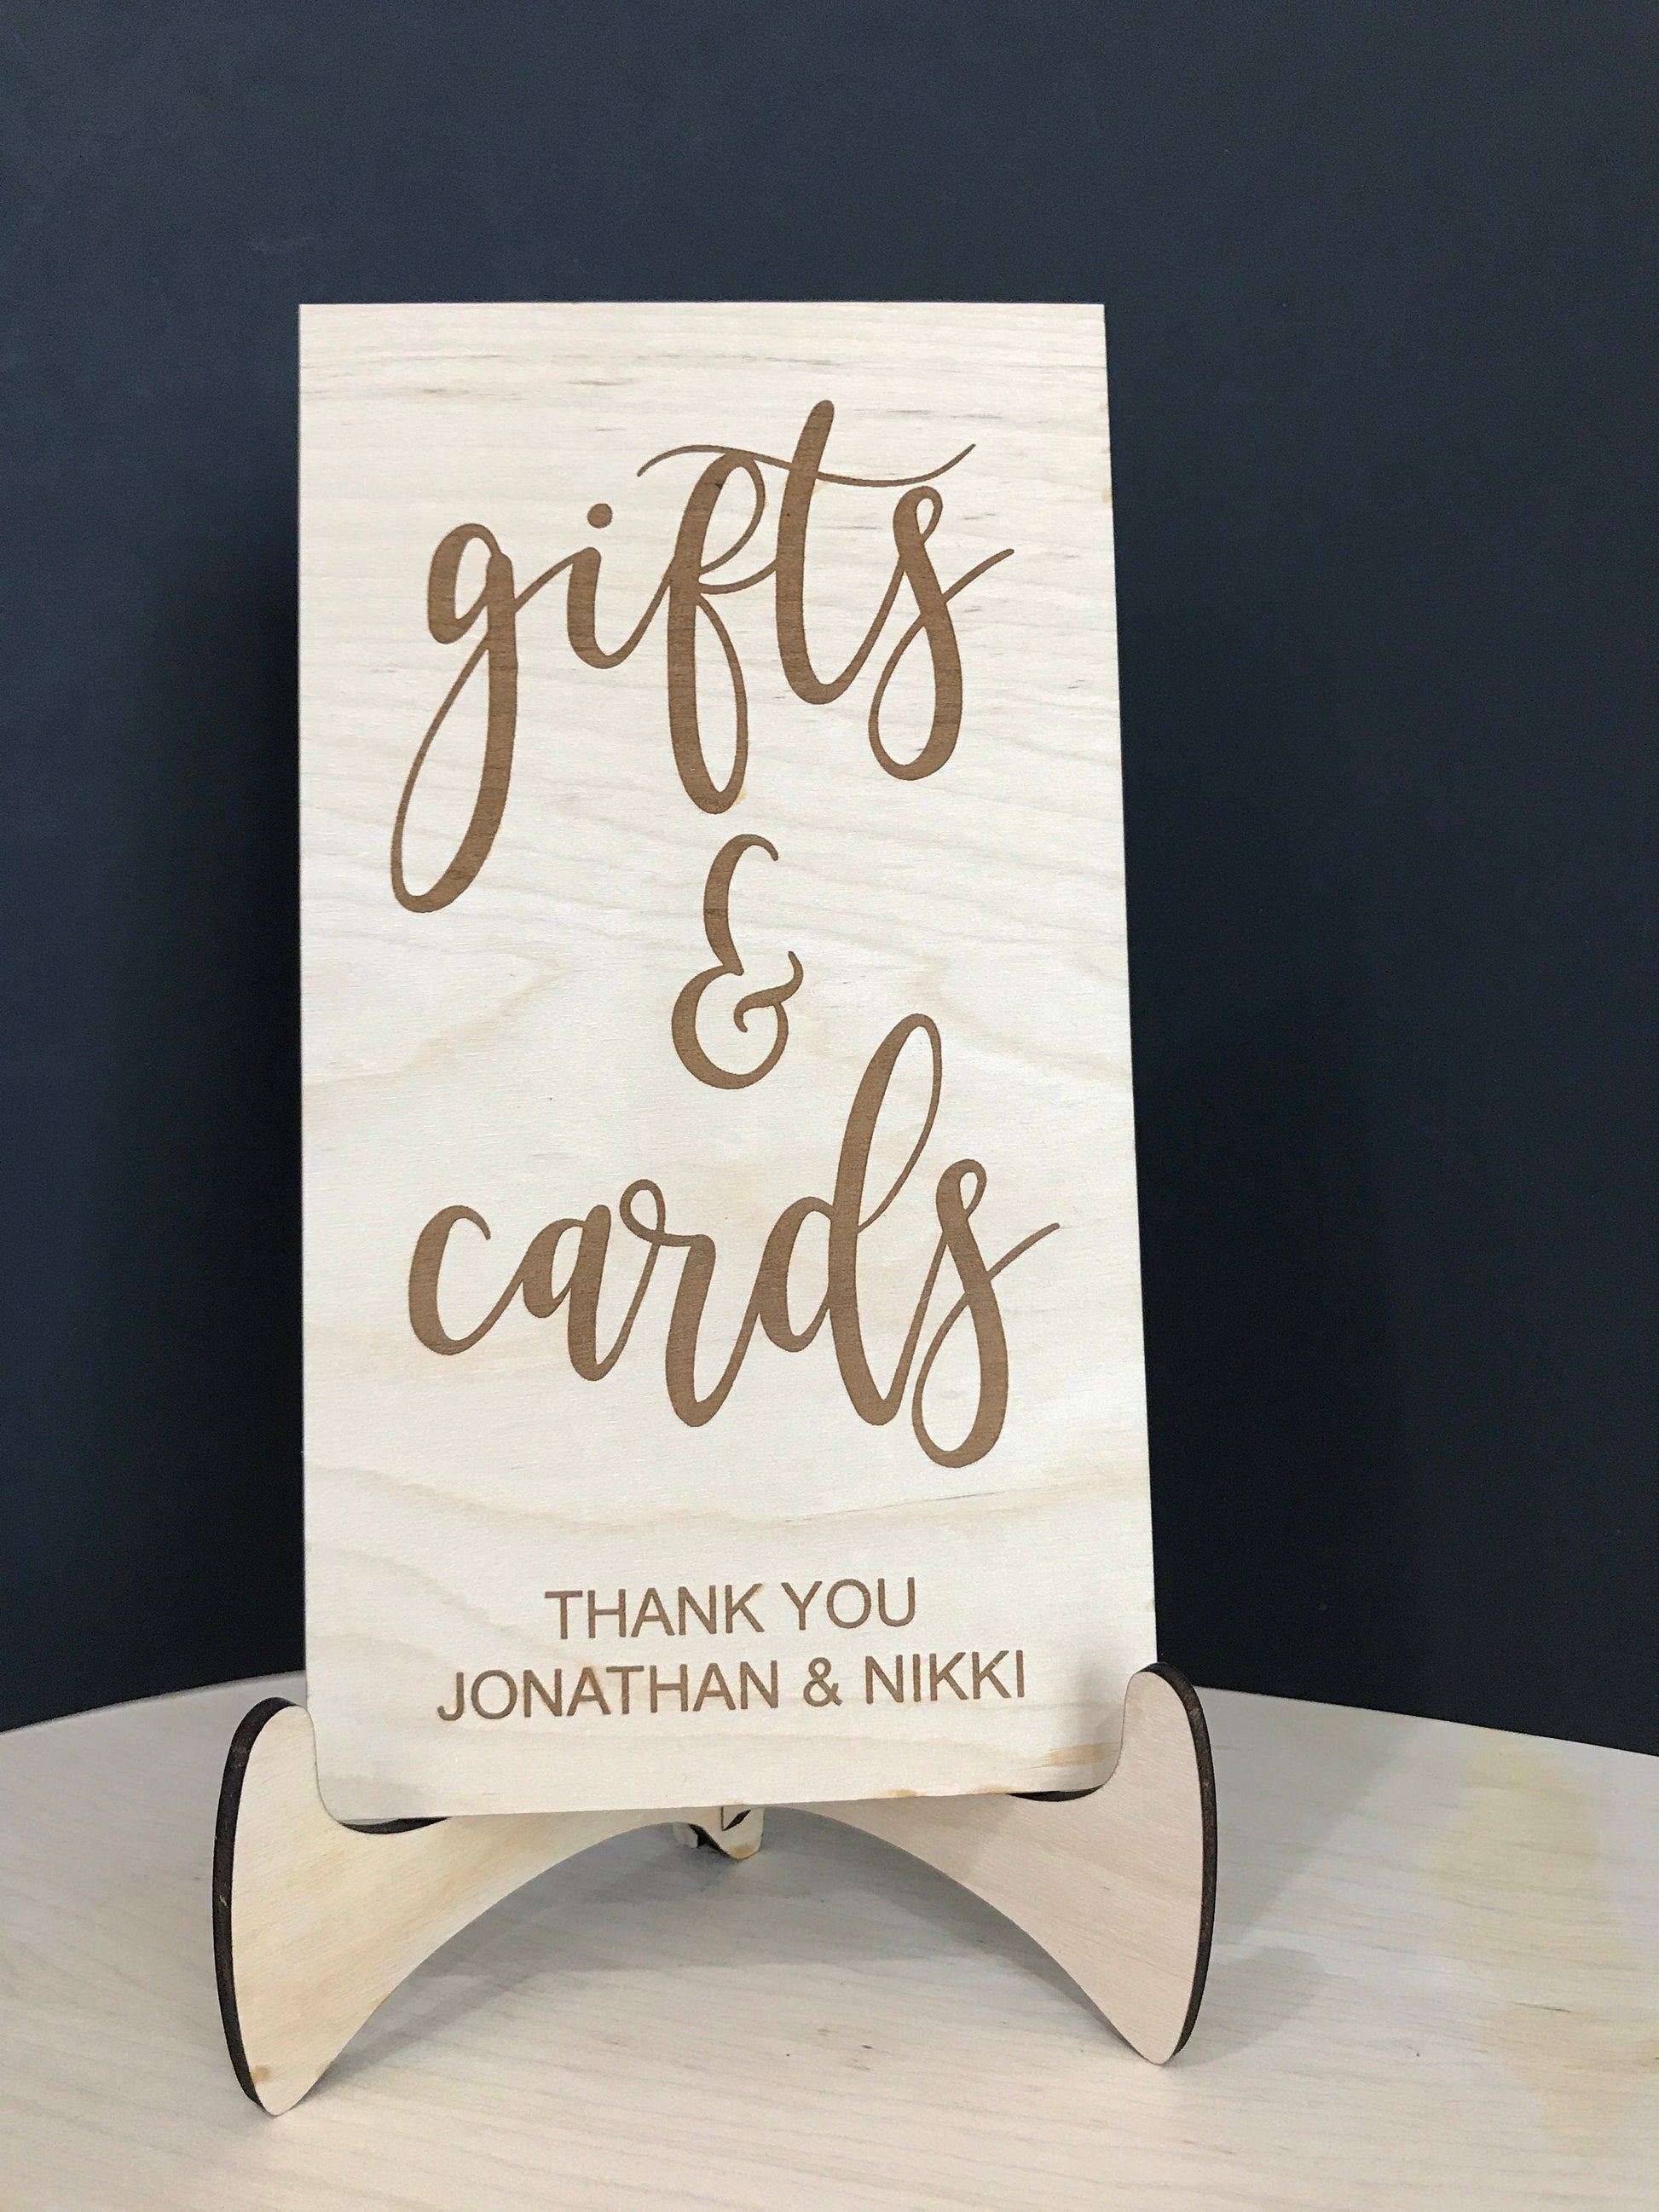 gifts and cards thank you sign - personalized wedding decor 